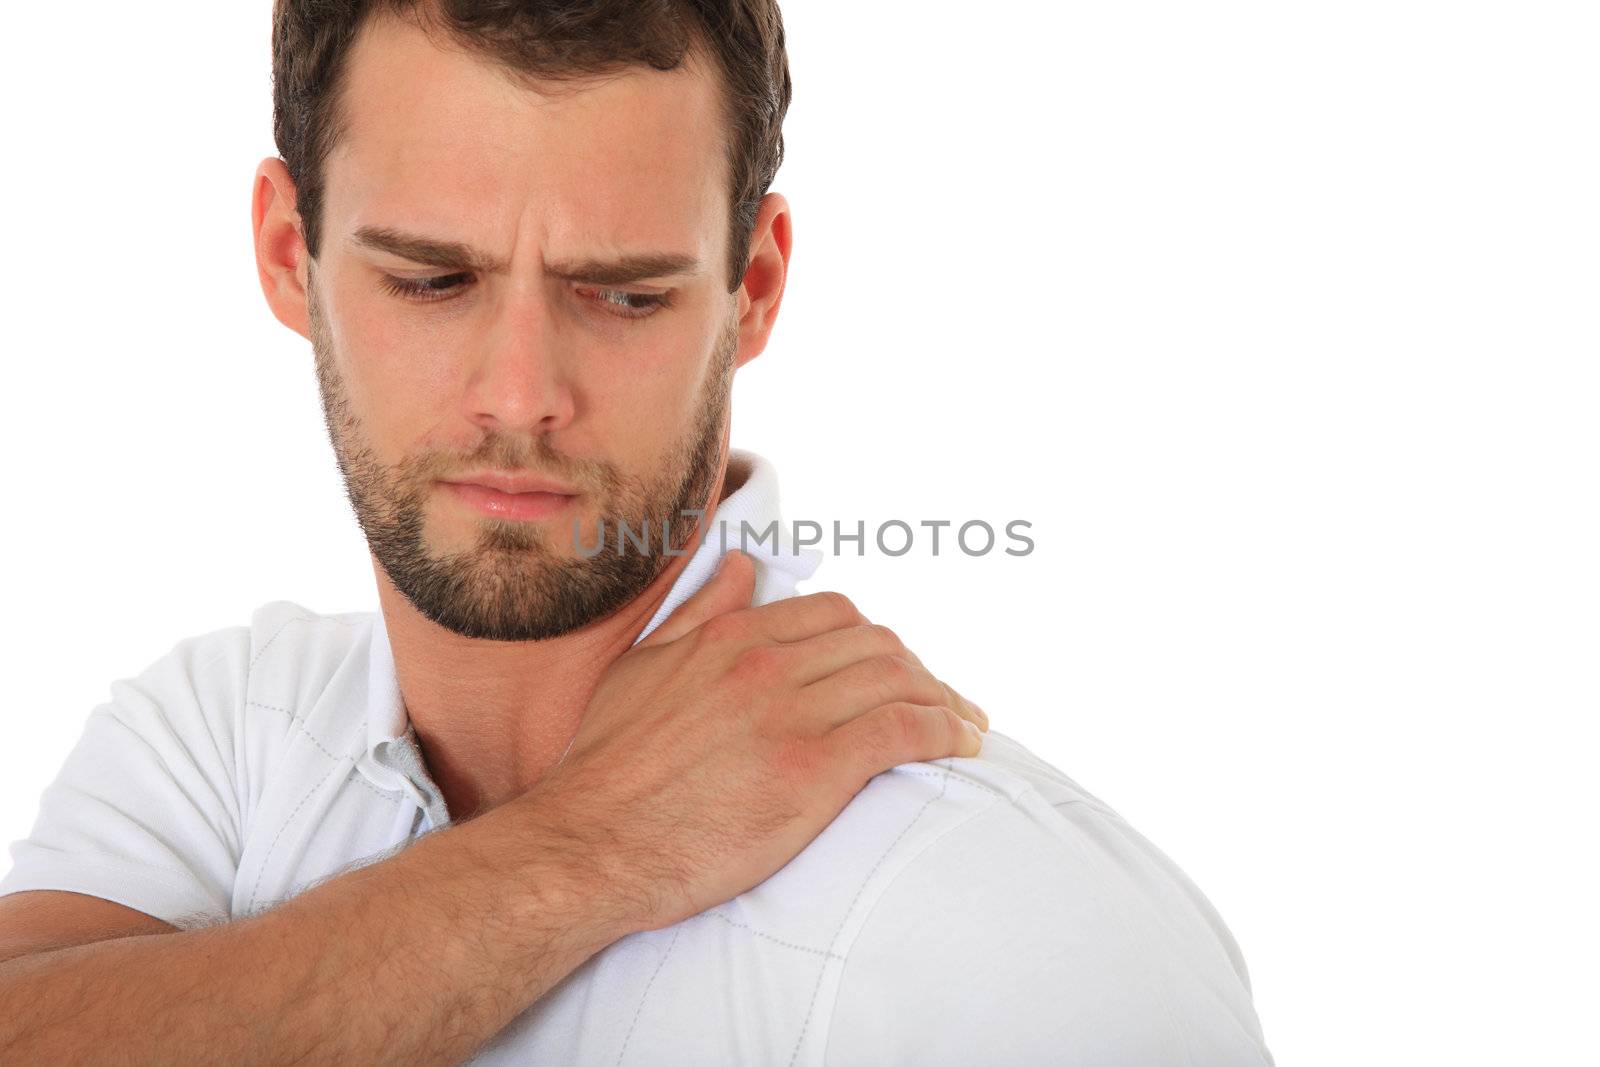 Young guy got muscles tension. All on white background.